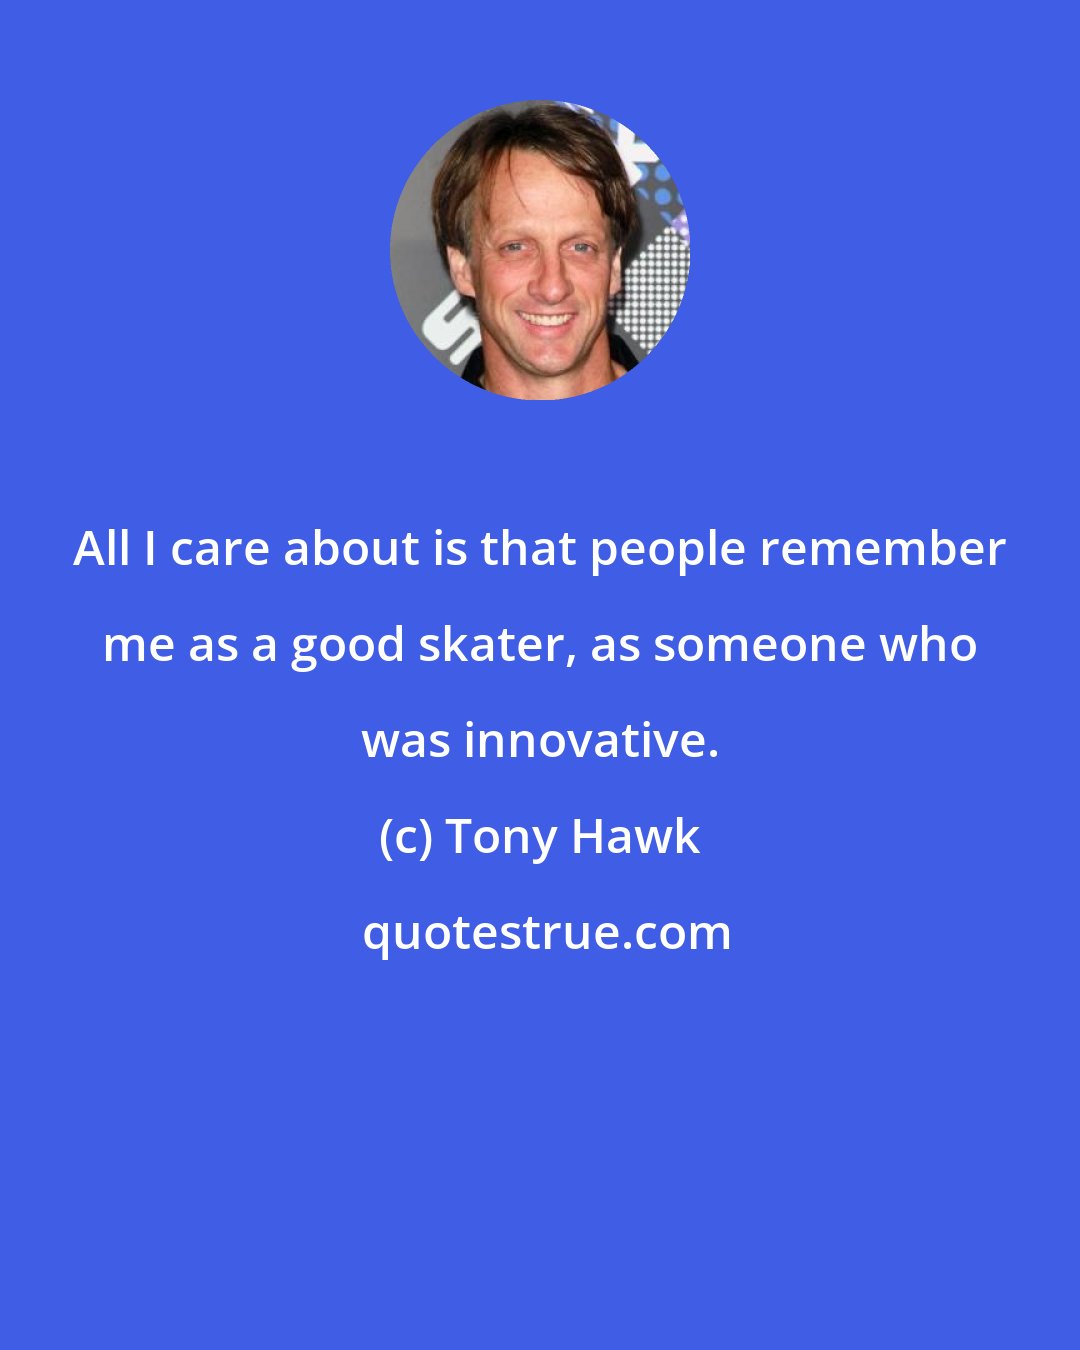 Tony Hawk: All I care about is that people remember me as a good skater, as someone who was innovative.